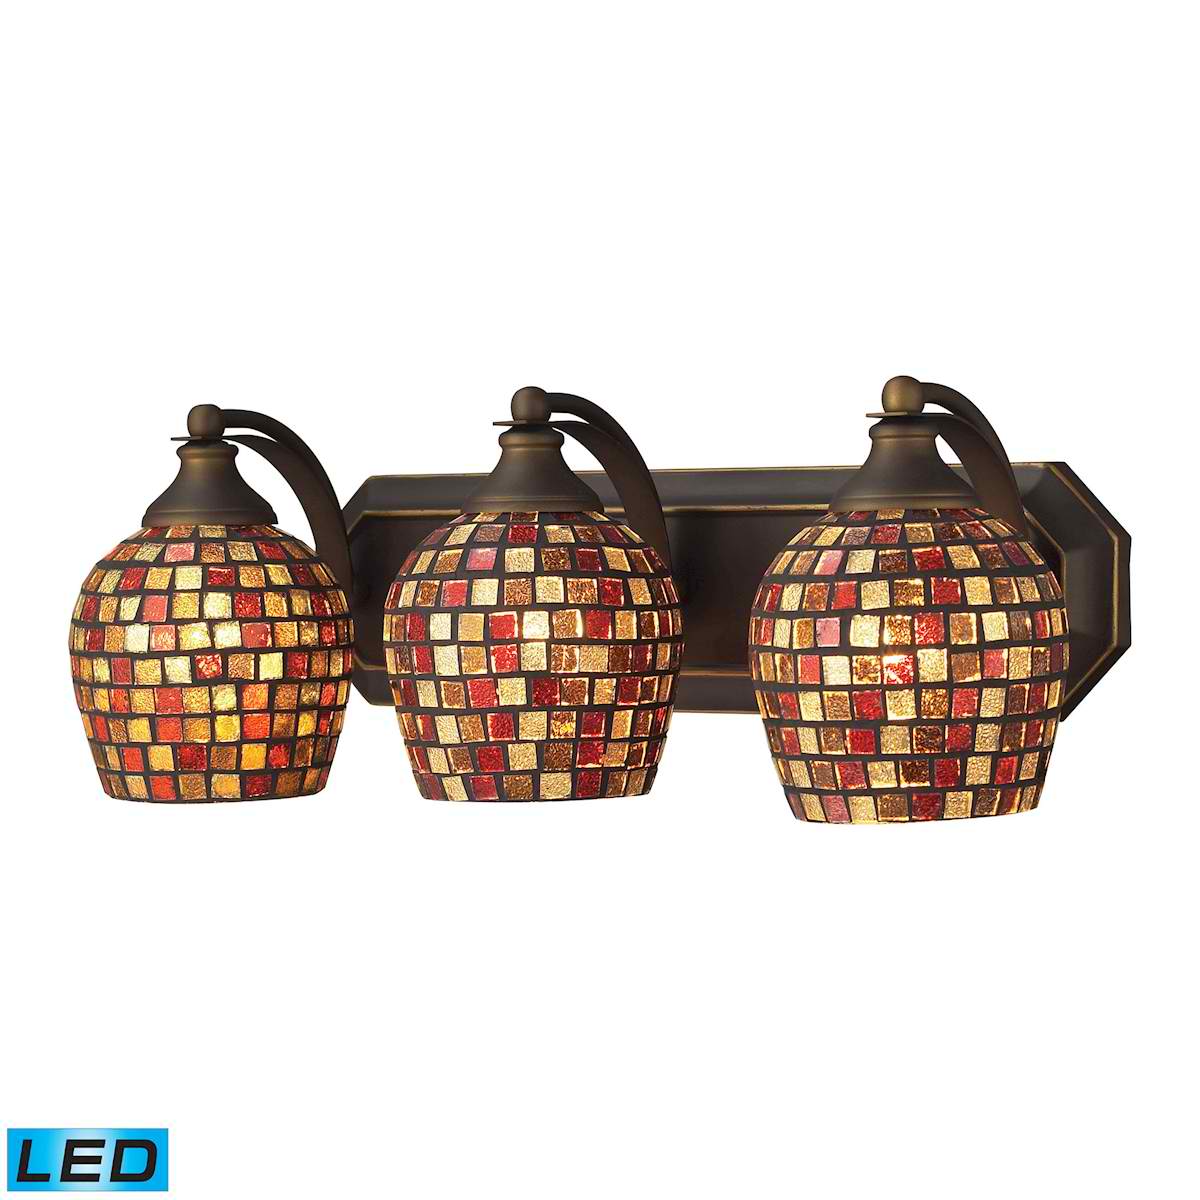 3 Light Vanity in Aged Bronze and Multi Mosaic Glass - LED, 800 Lumens (2400 Lumens Total) with Full Scale